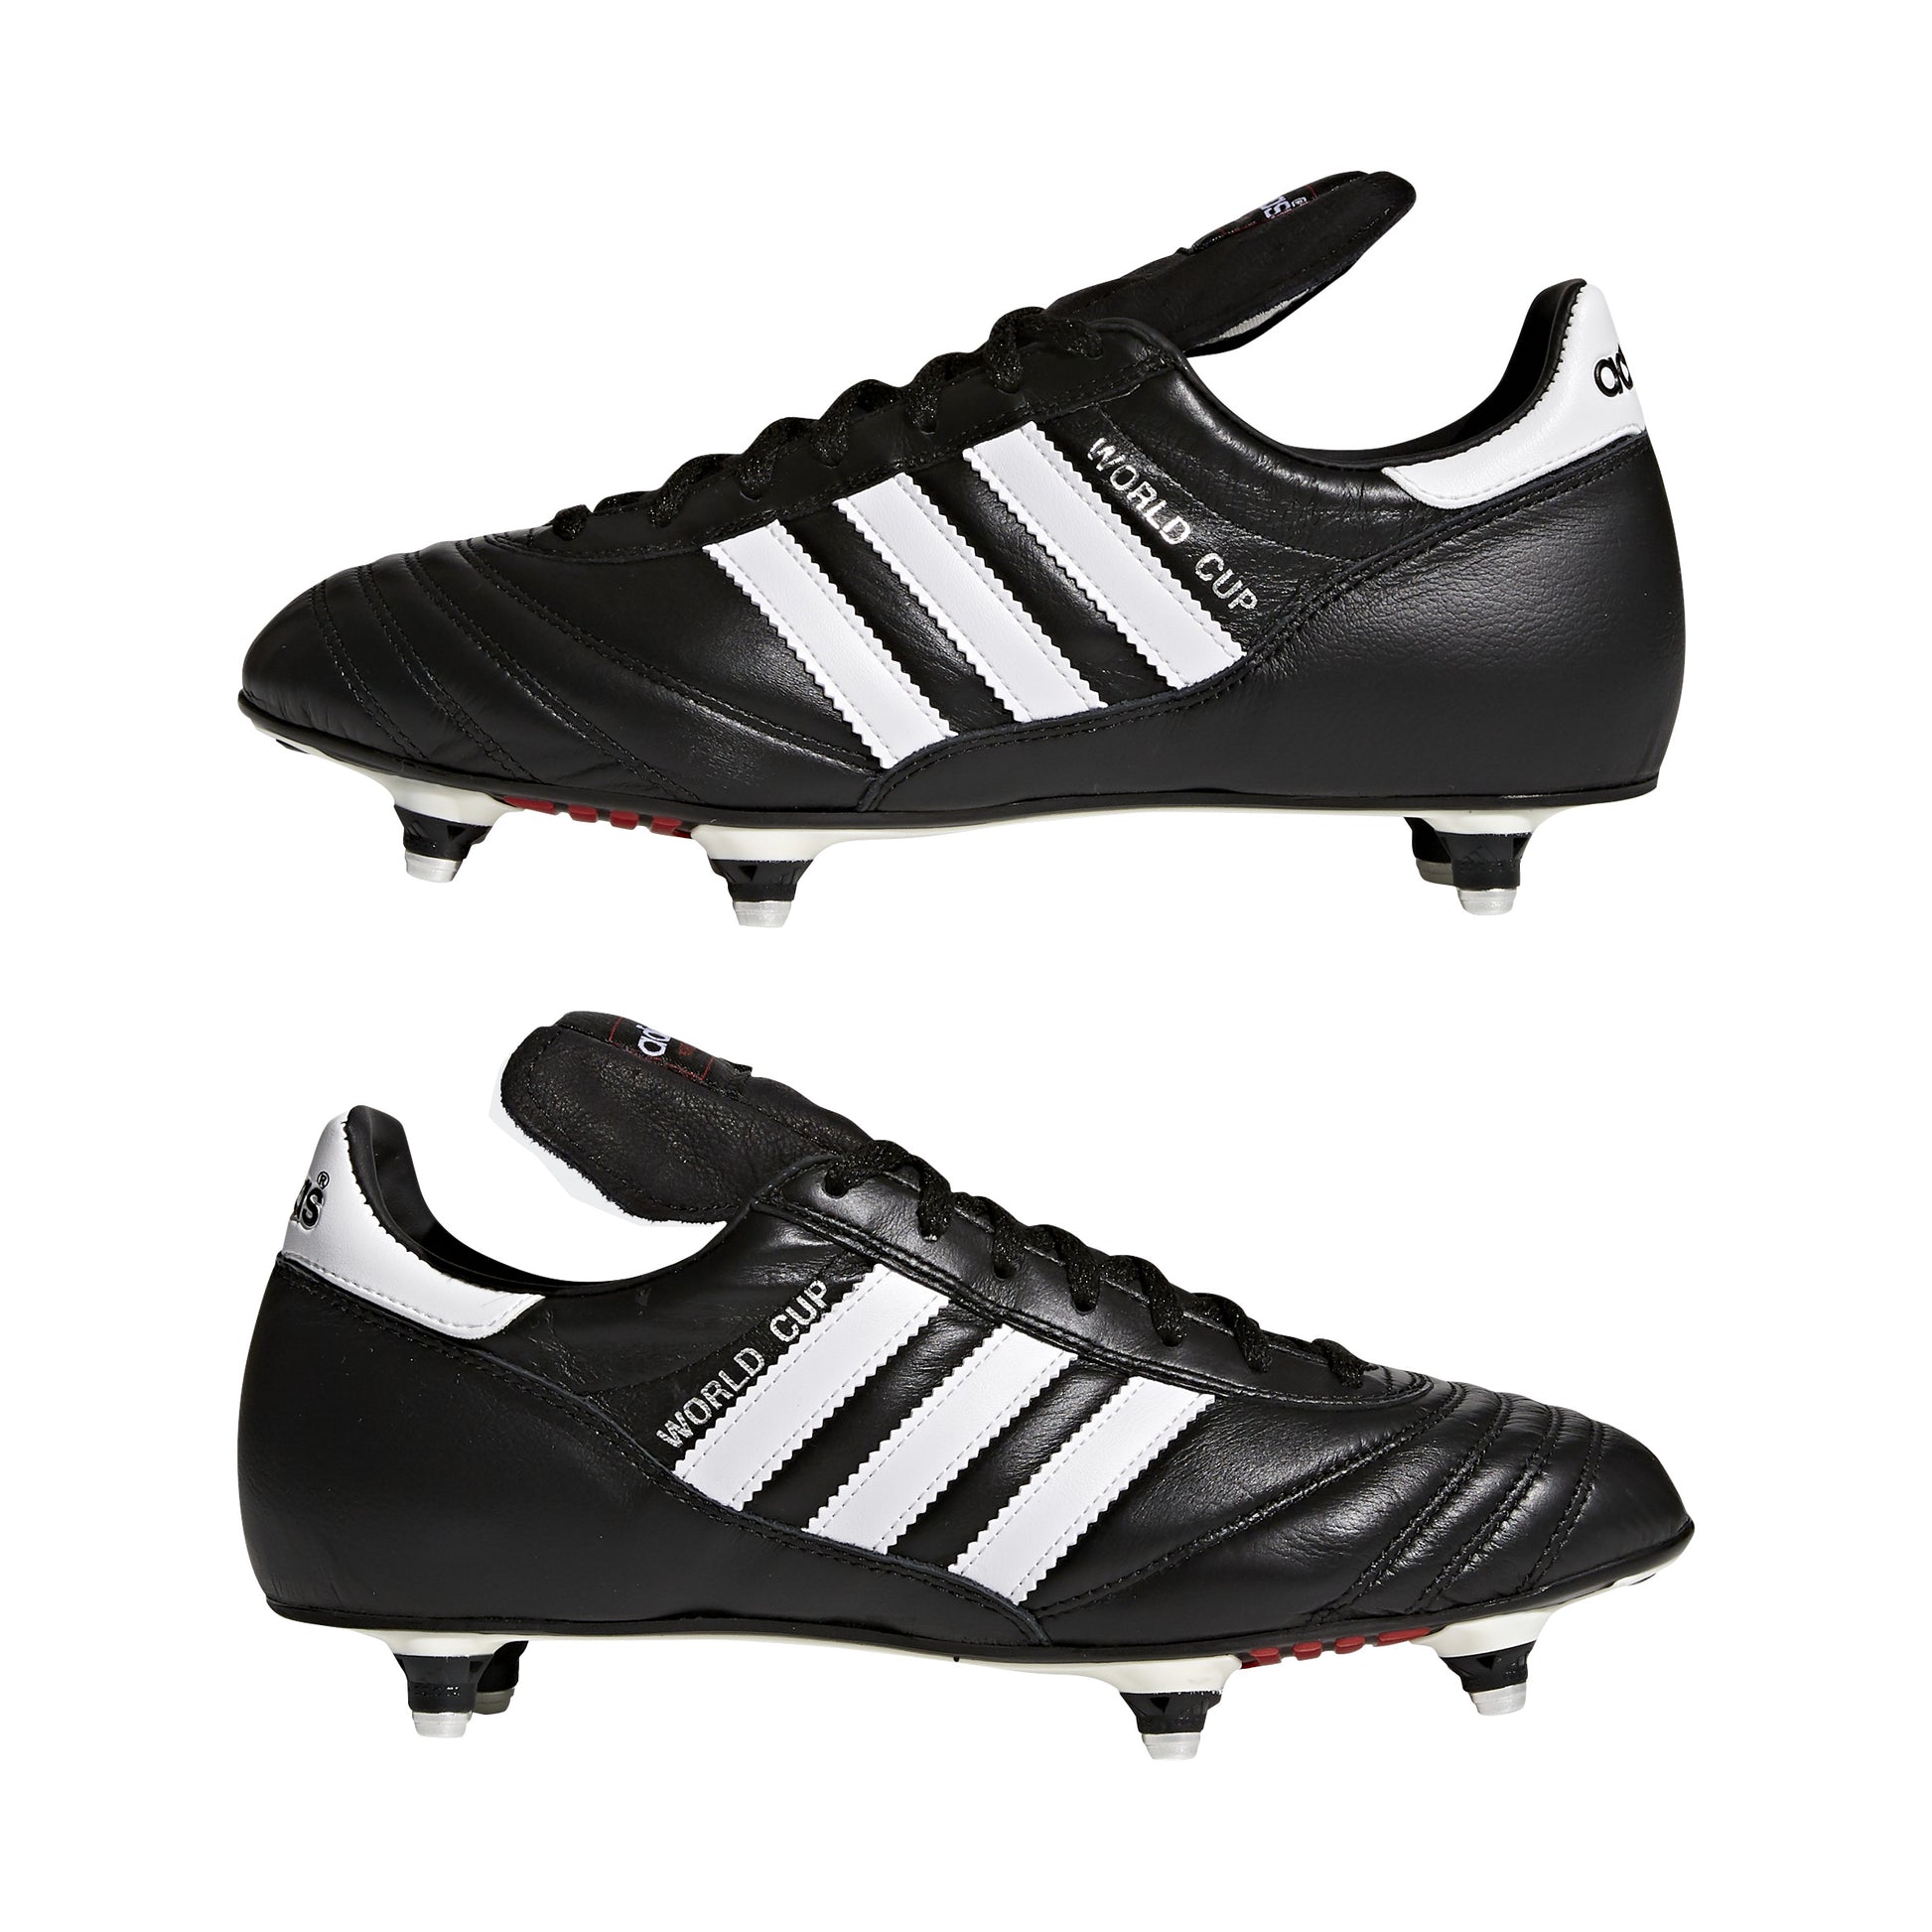 Adidas World Cup Football Boots - Black - Queensferry Sports